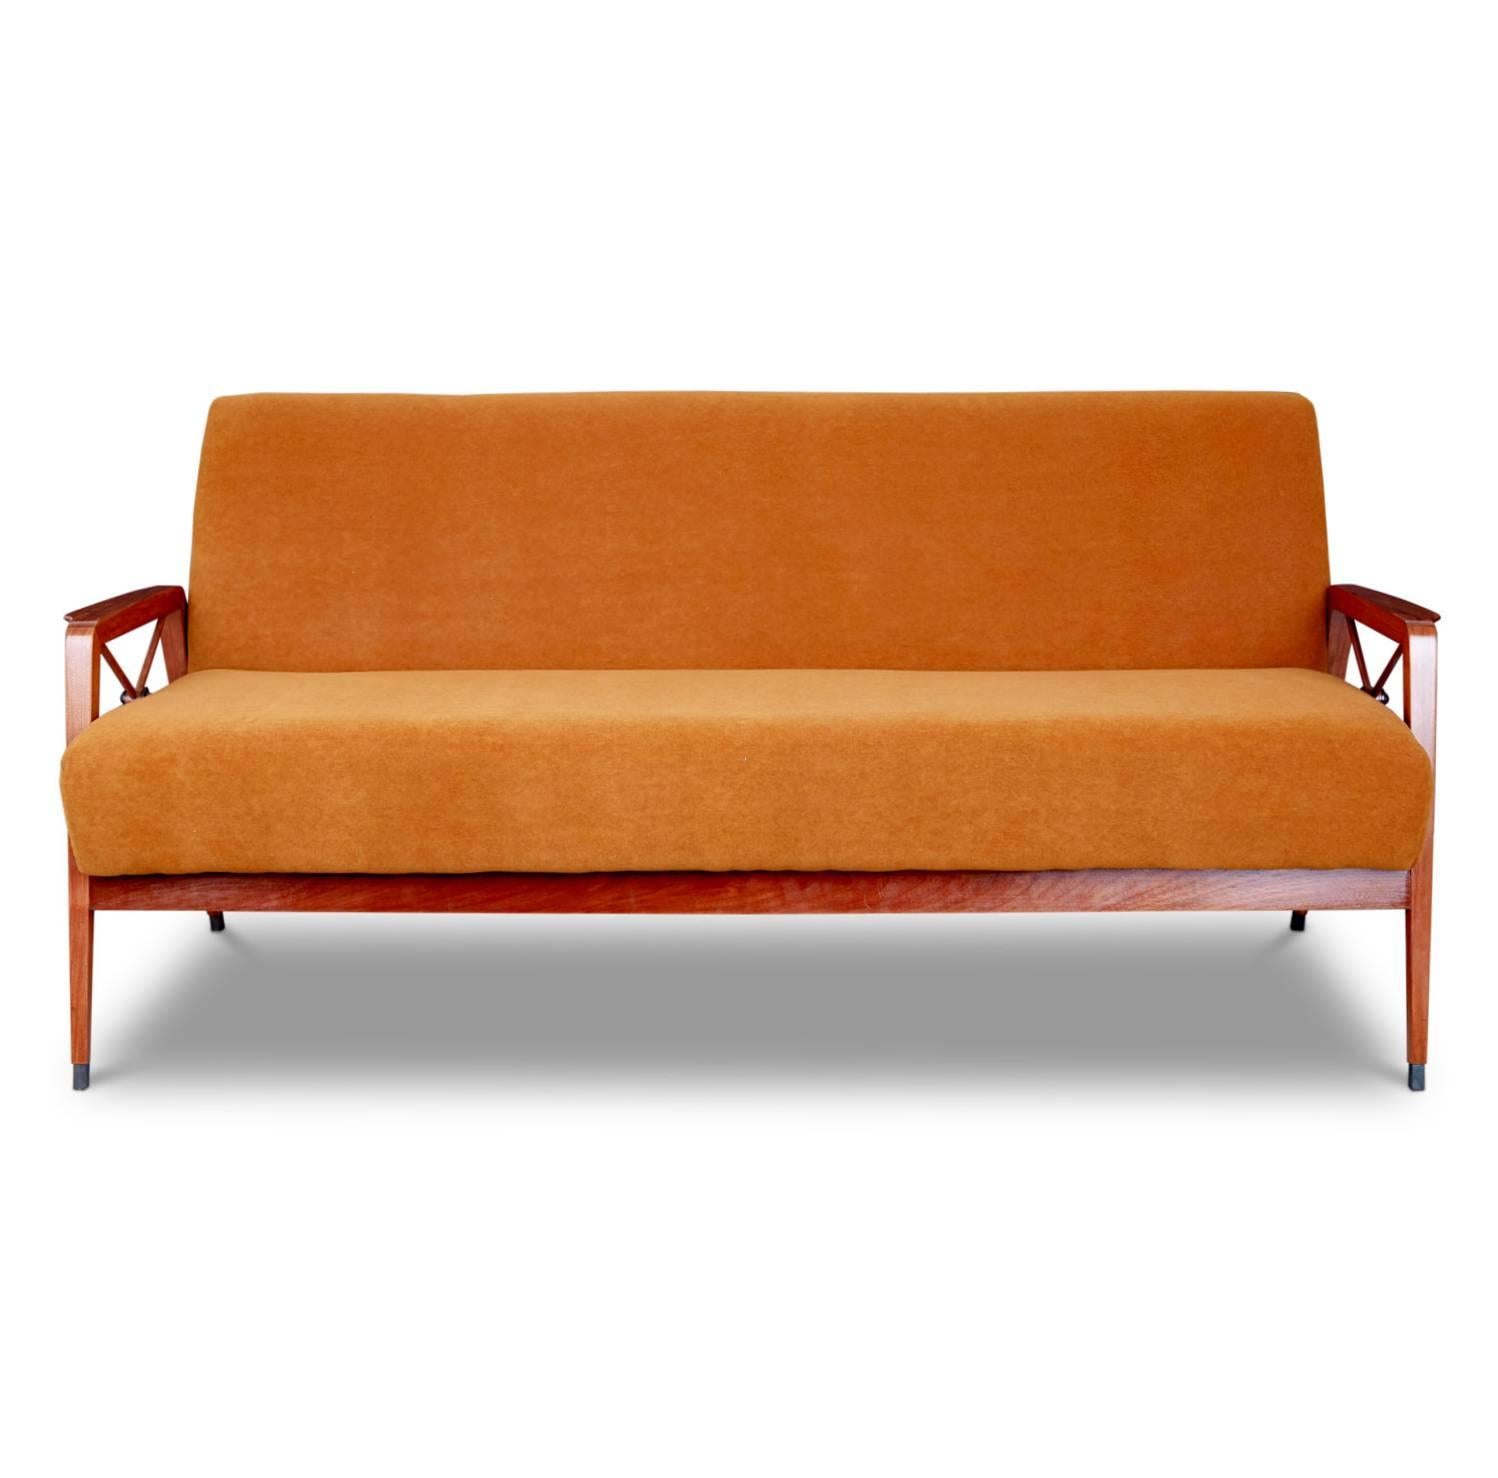 Elegant sofa with exotic Caviuna wood frame, new tangerine mohair upholstery, bronze-tipped feet and bronze medallions by Cavallaro, 1960s, Brazil. This exquisite Brazilian piece has been recently restored and reupholstered in a rich persimmon color